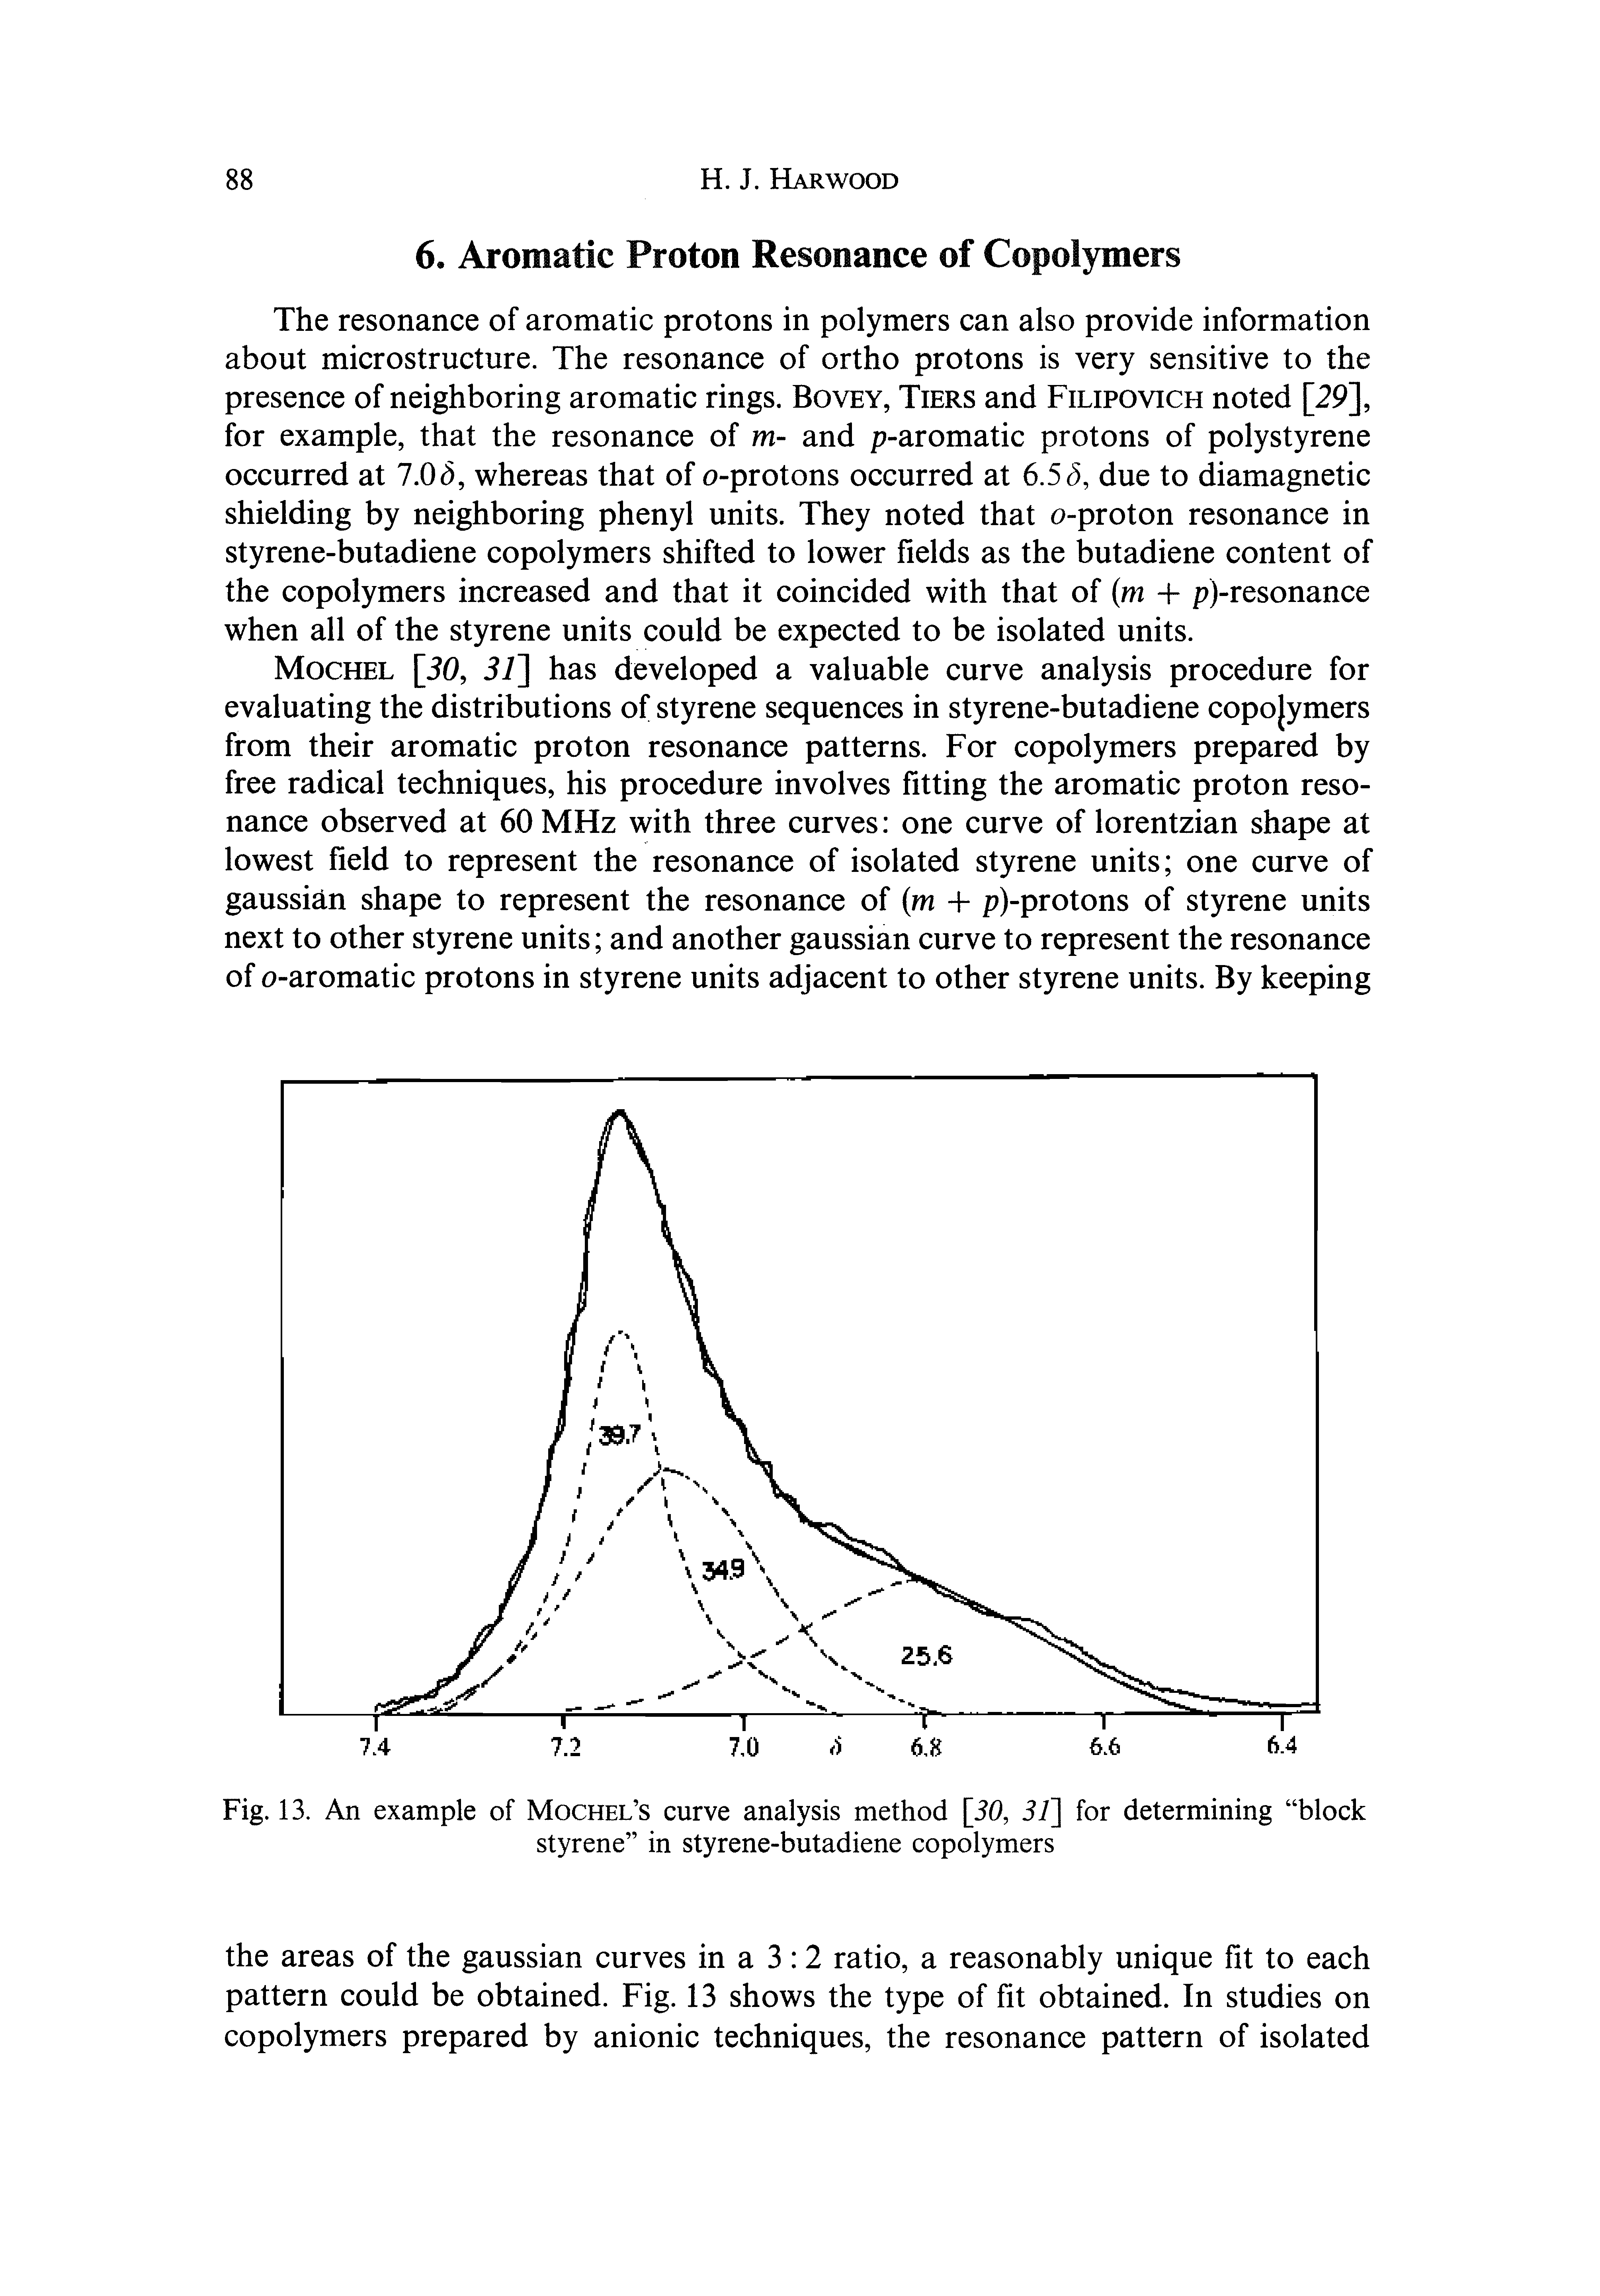 Fig. 13. An example of Mochel s curve analysis method [30, 31] for determining block styrene in styrene-butadiene copolymers...